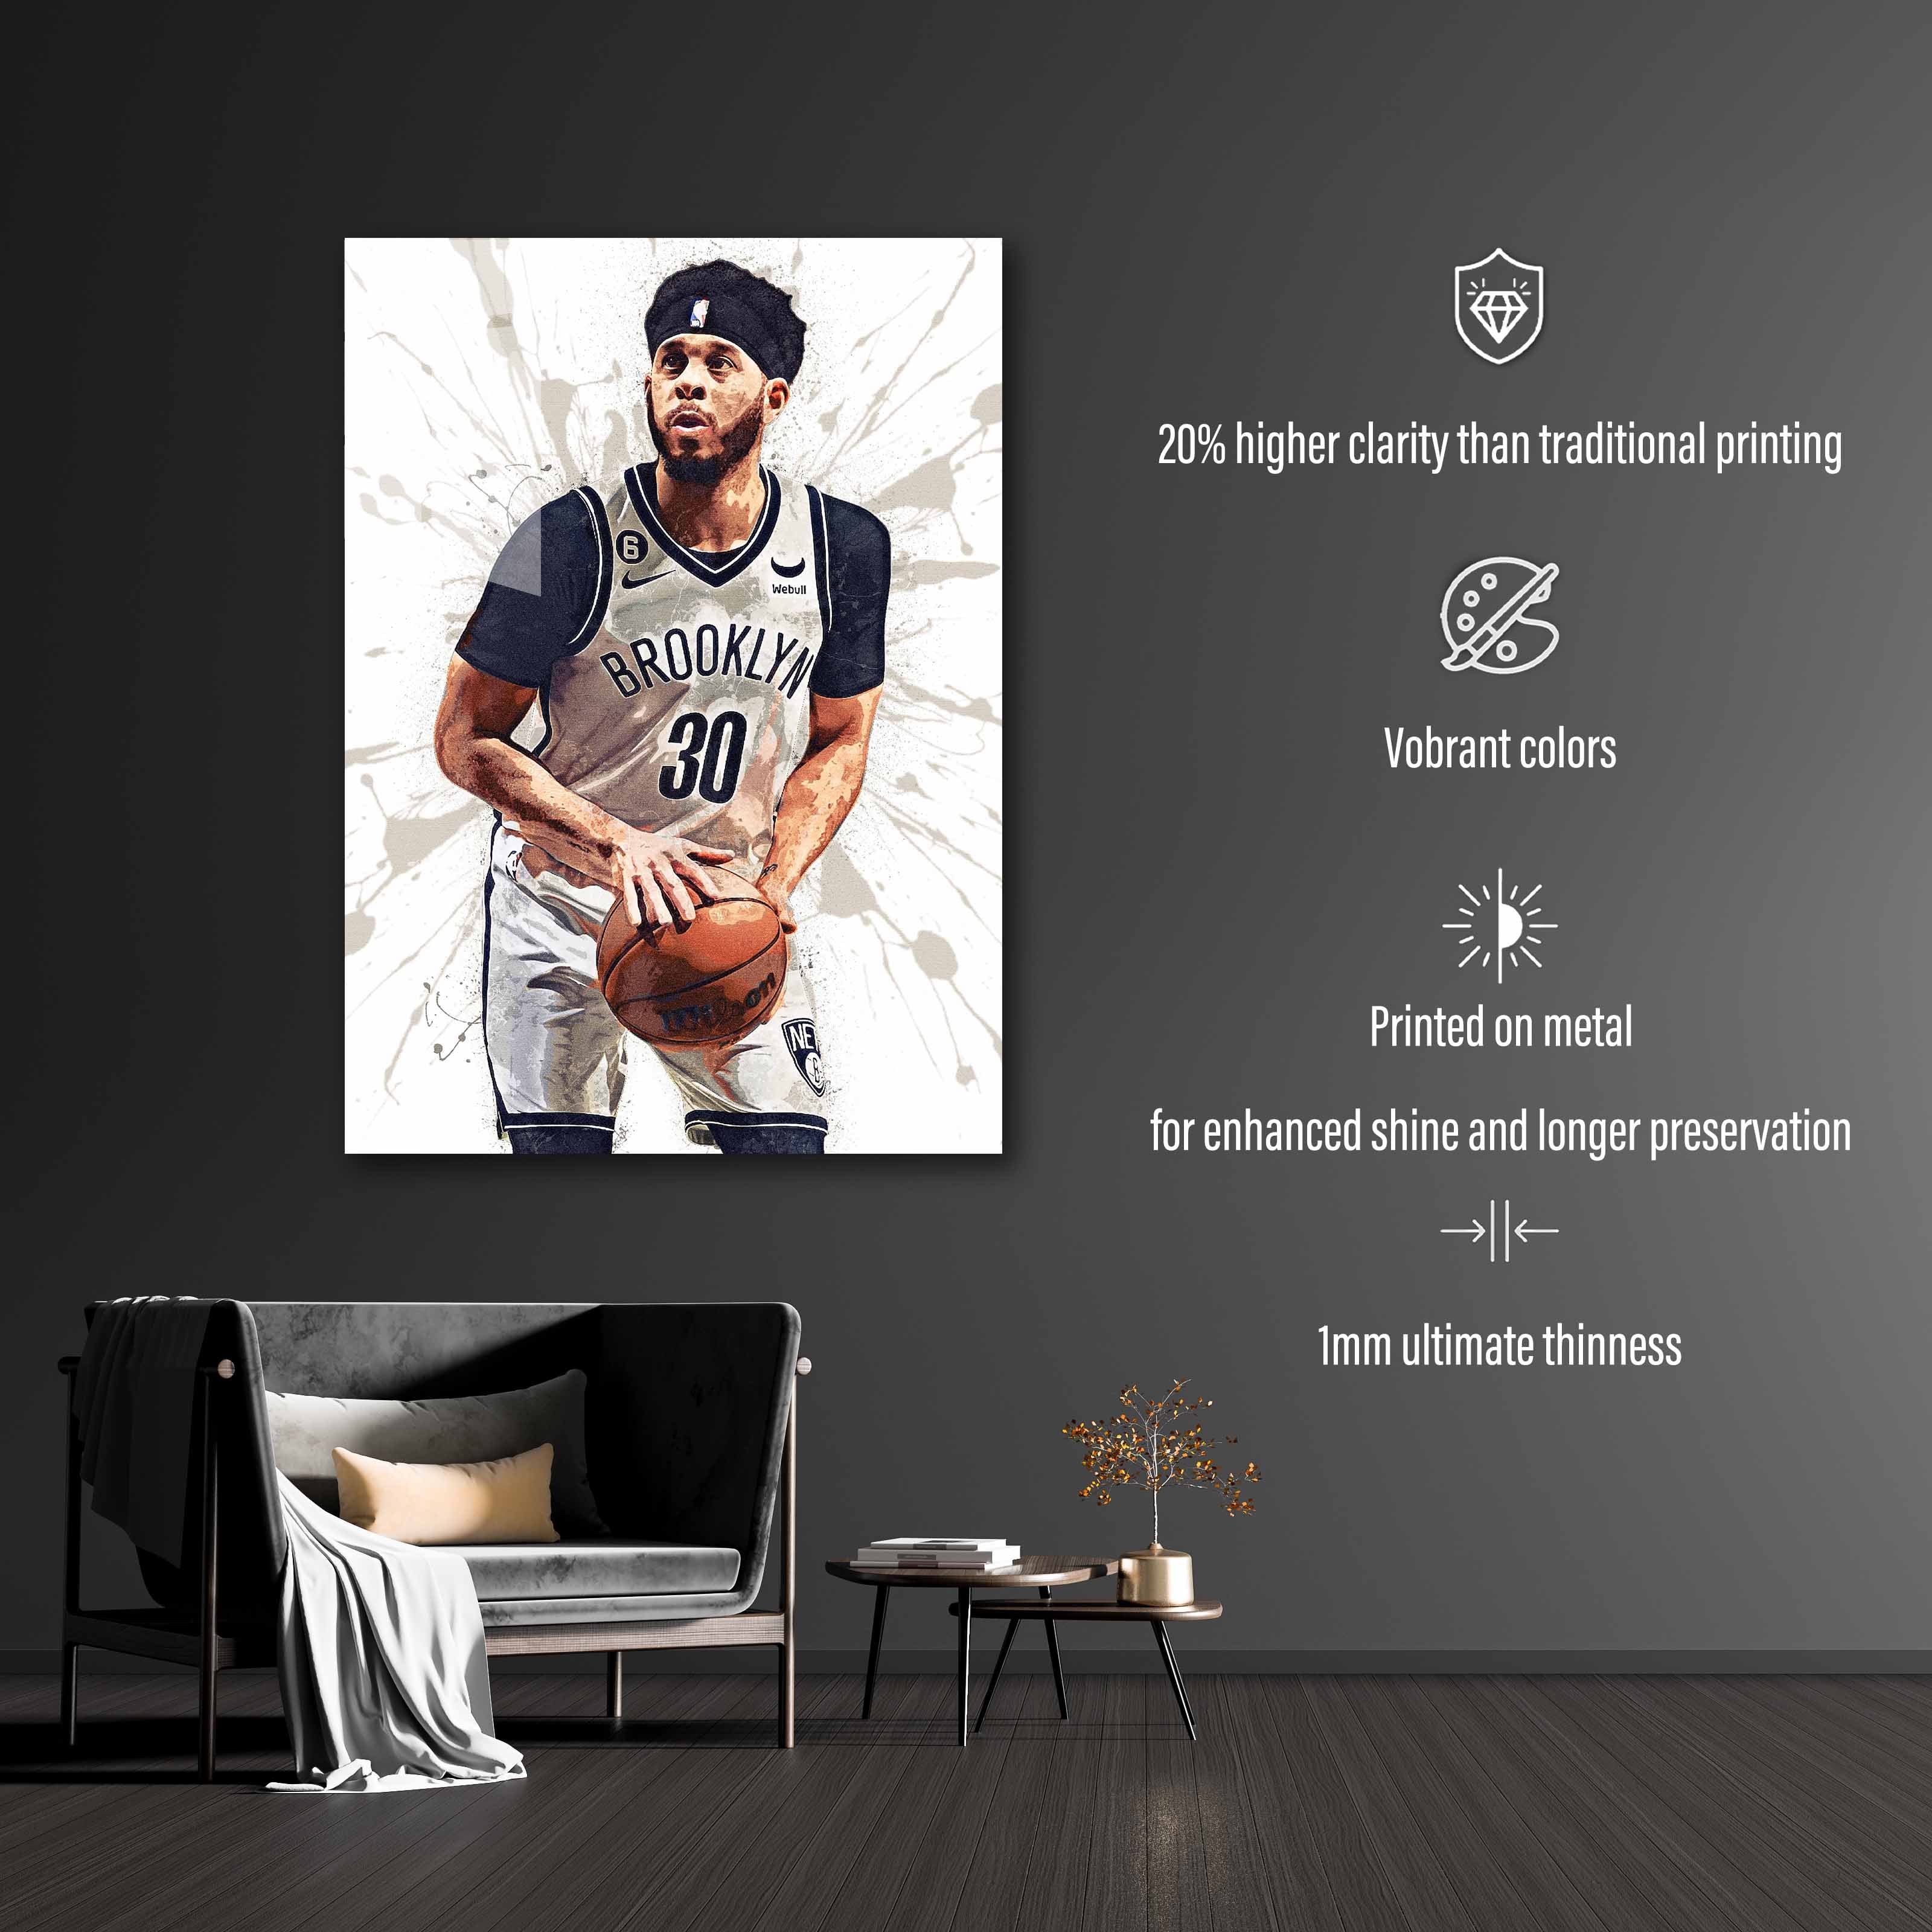 Seth Curry Brooklyn Nets-designed by @Hoang Van Thuan